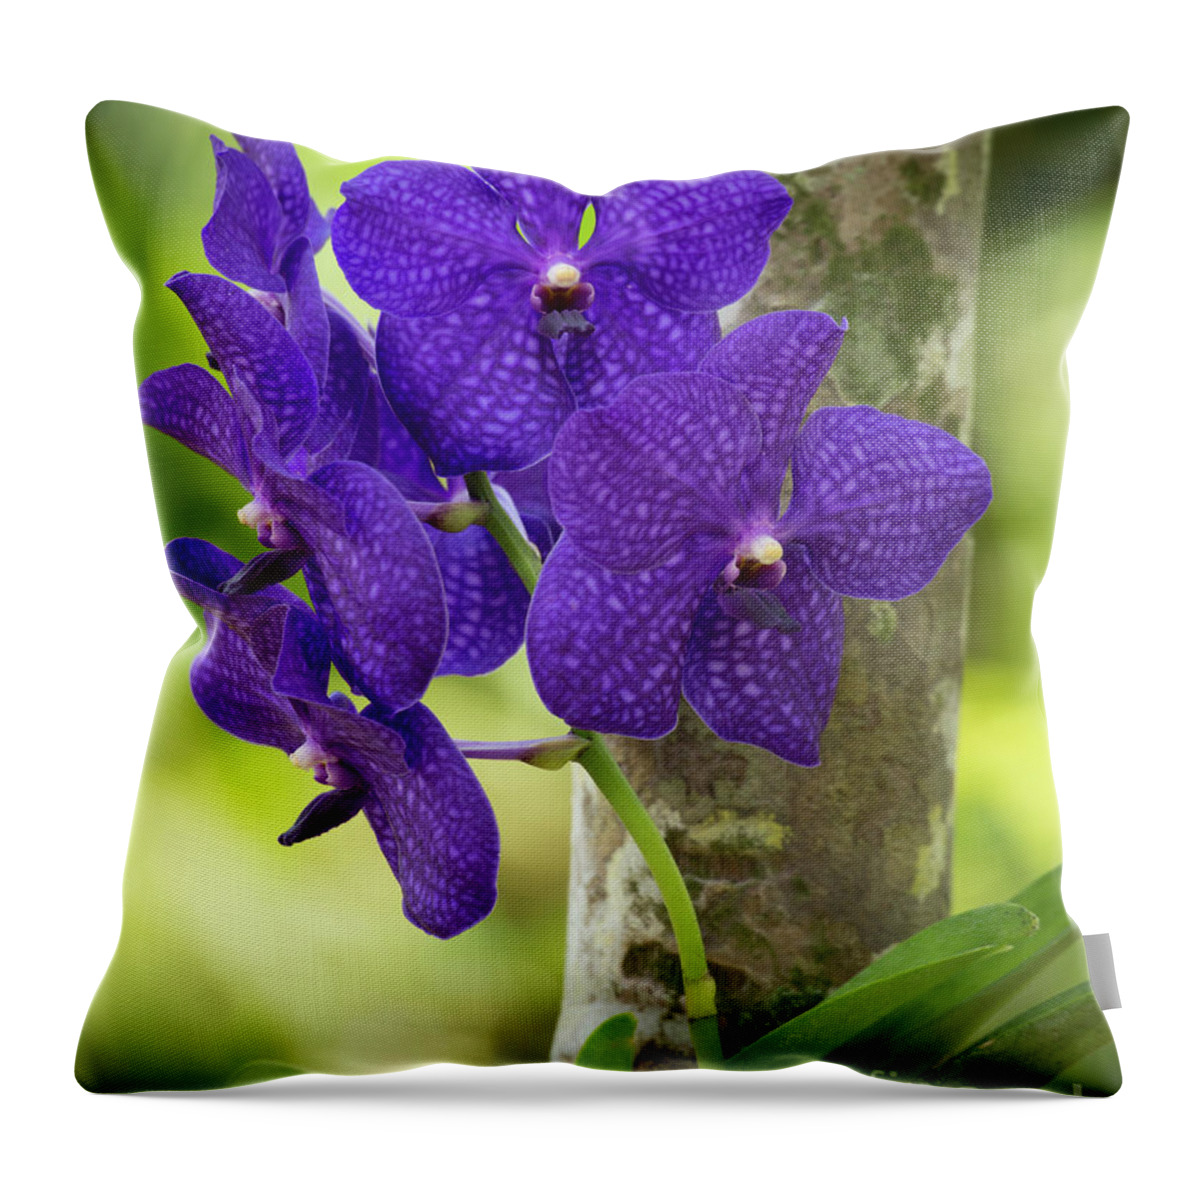 Flower Throw Pillow featuring the photograph Pretty Purple Orchds by Sabrina L Ryan